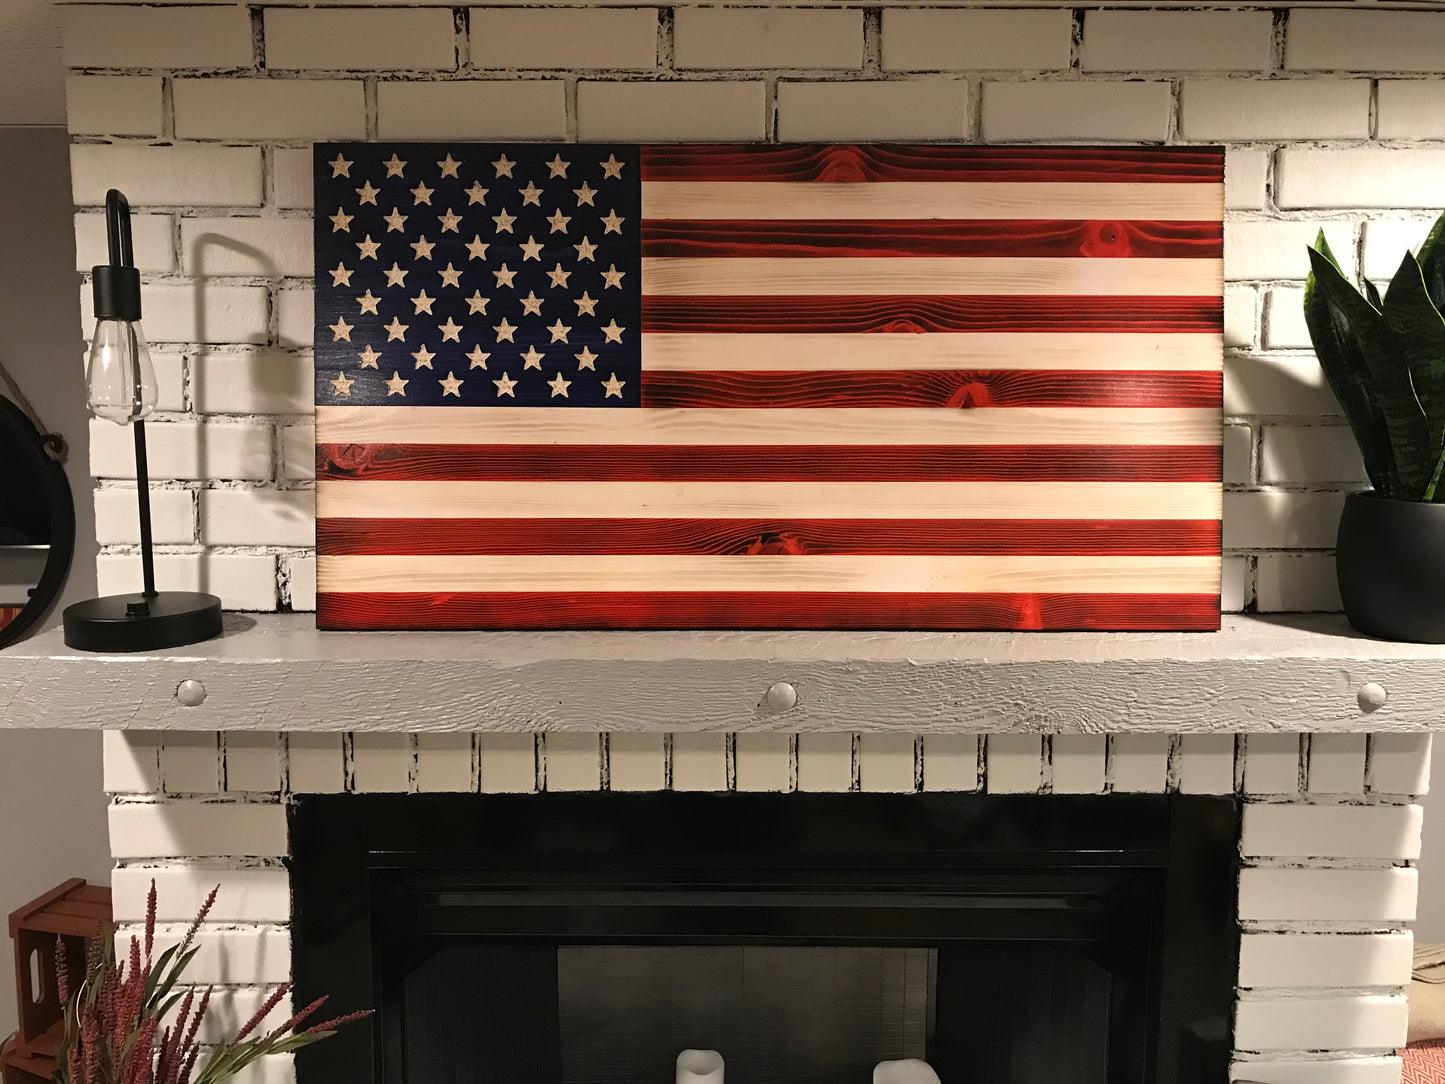 "We the People" The Original Red, White and Blue Charred American Wooden Flag, Rustic Decor, Handcrafted